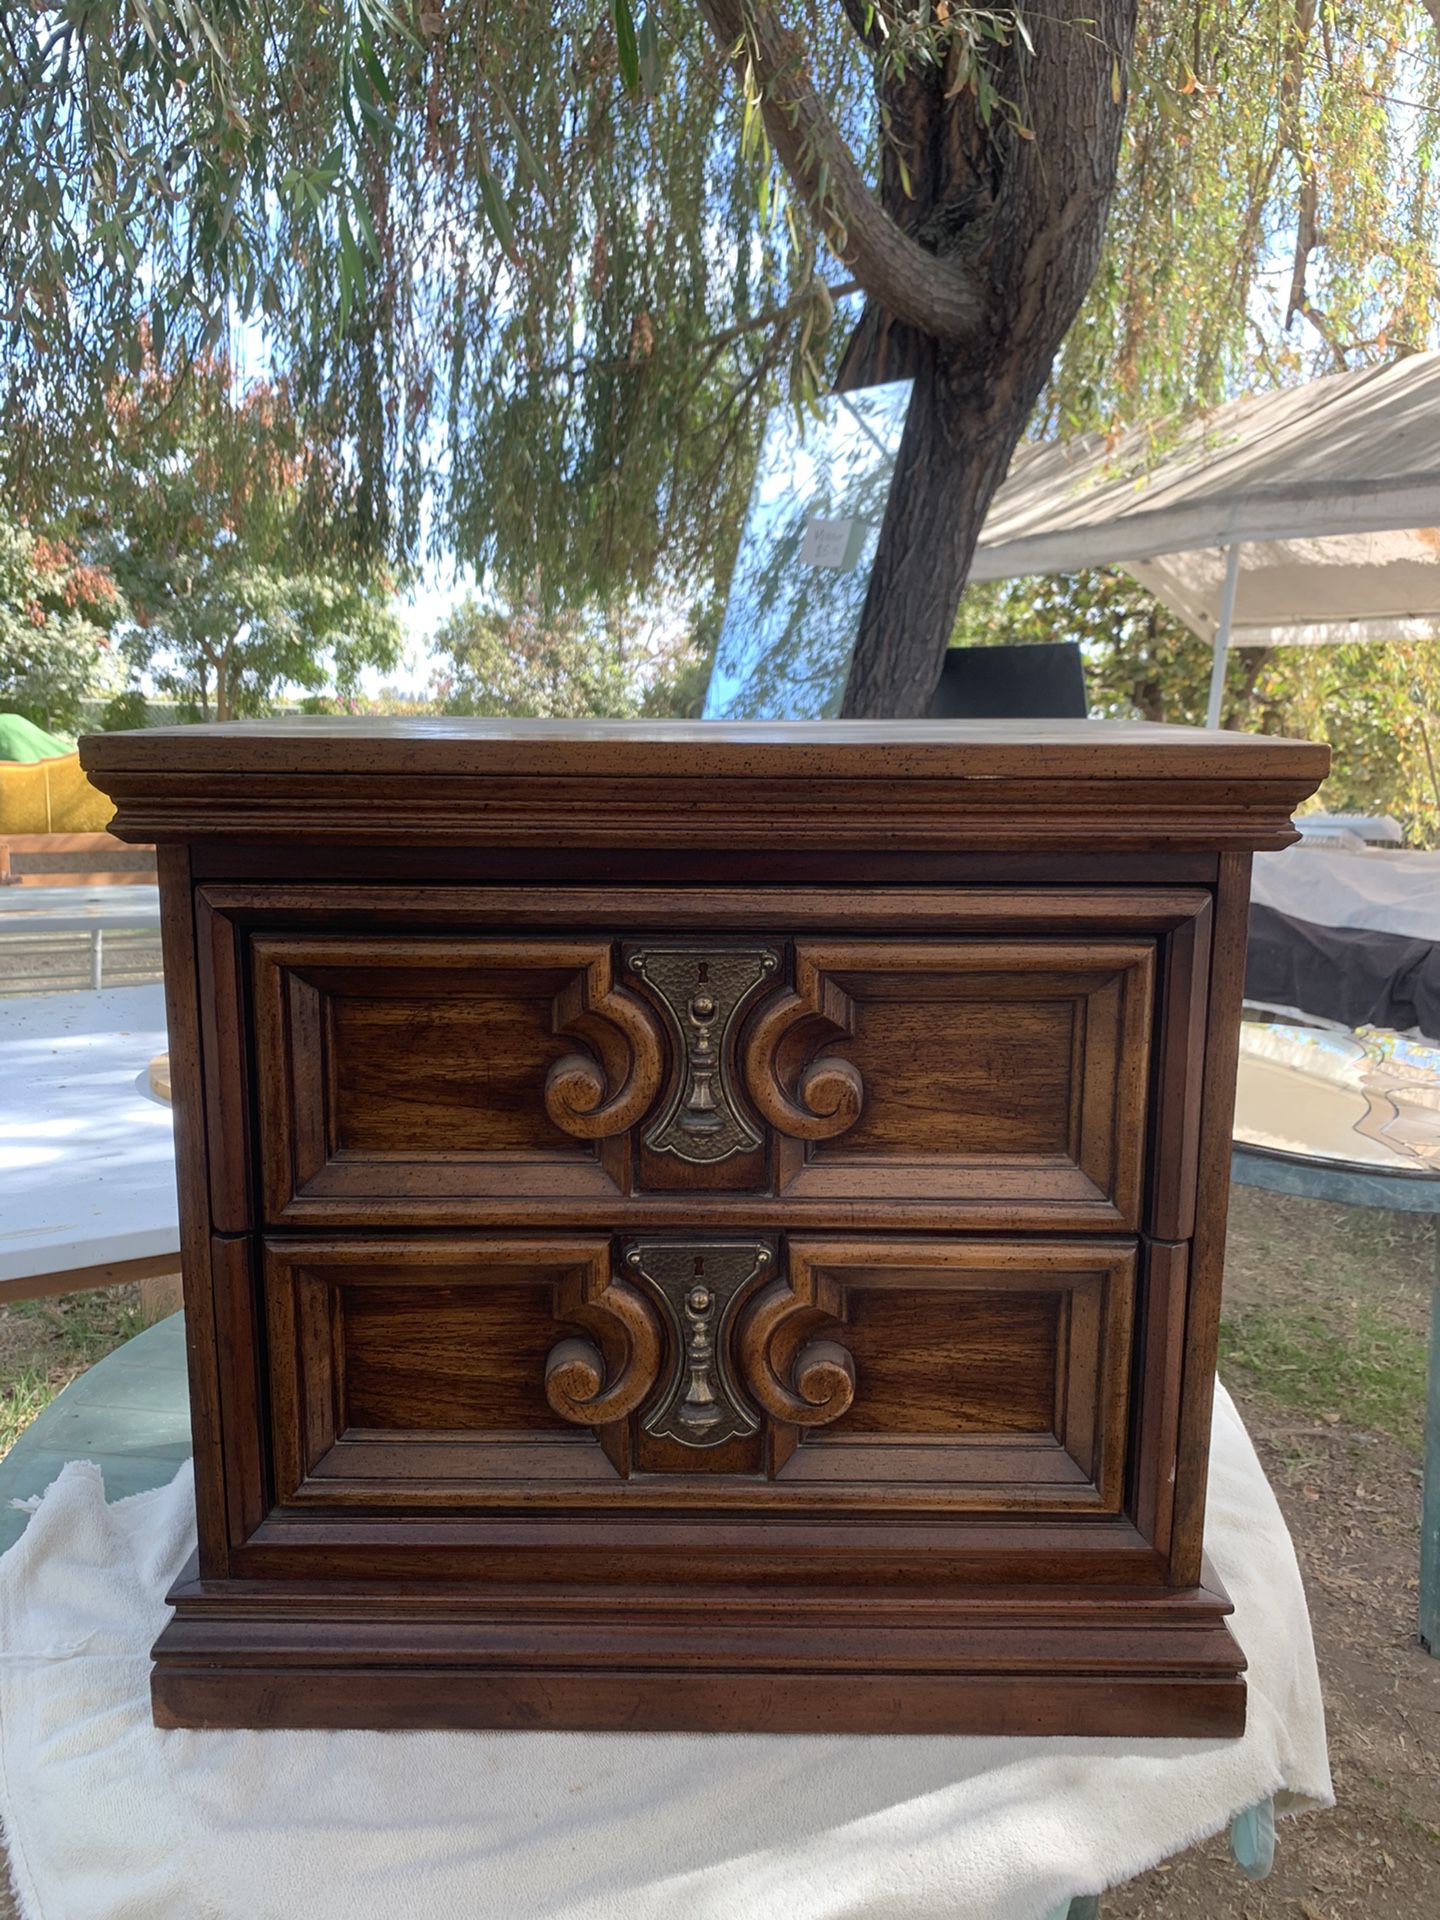 Small wood ornate end table storage cabinet